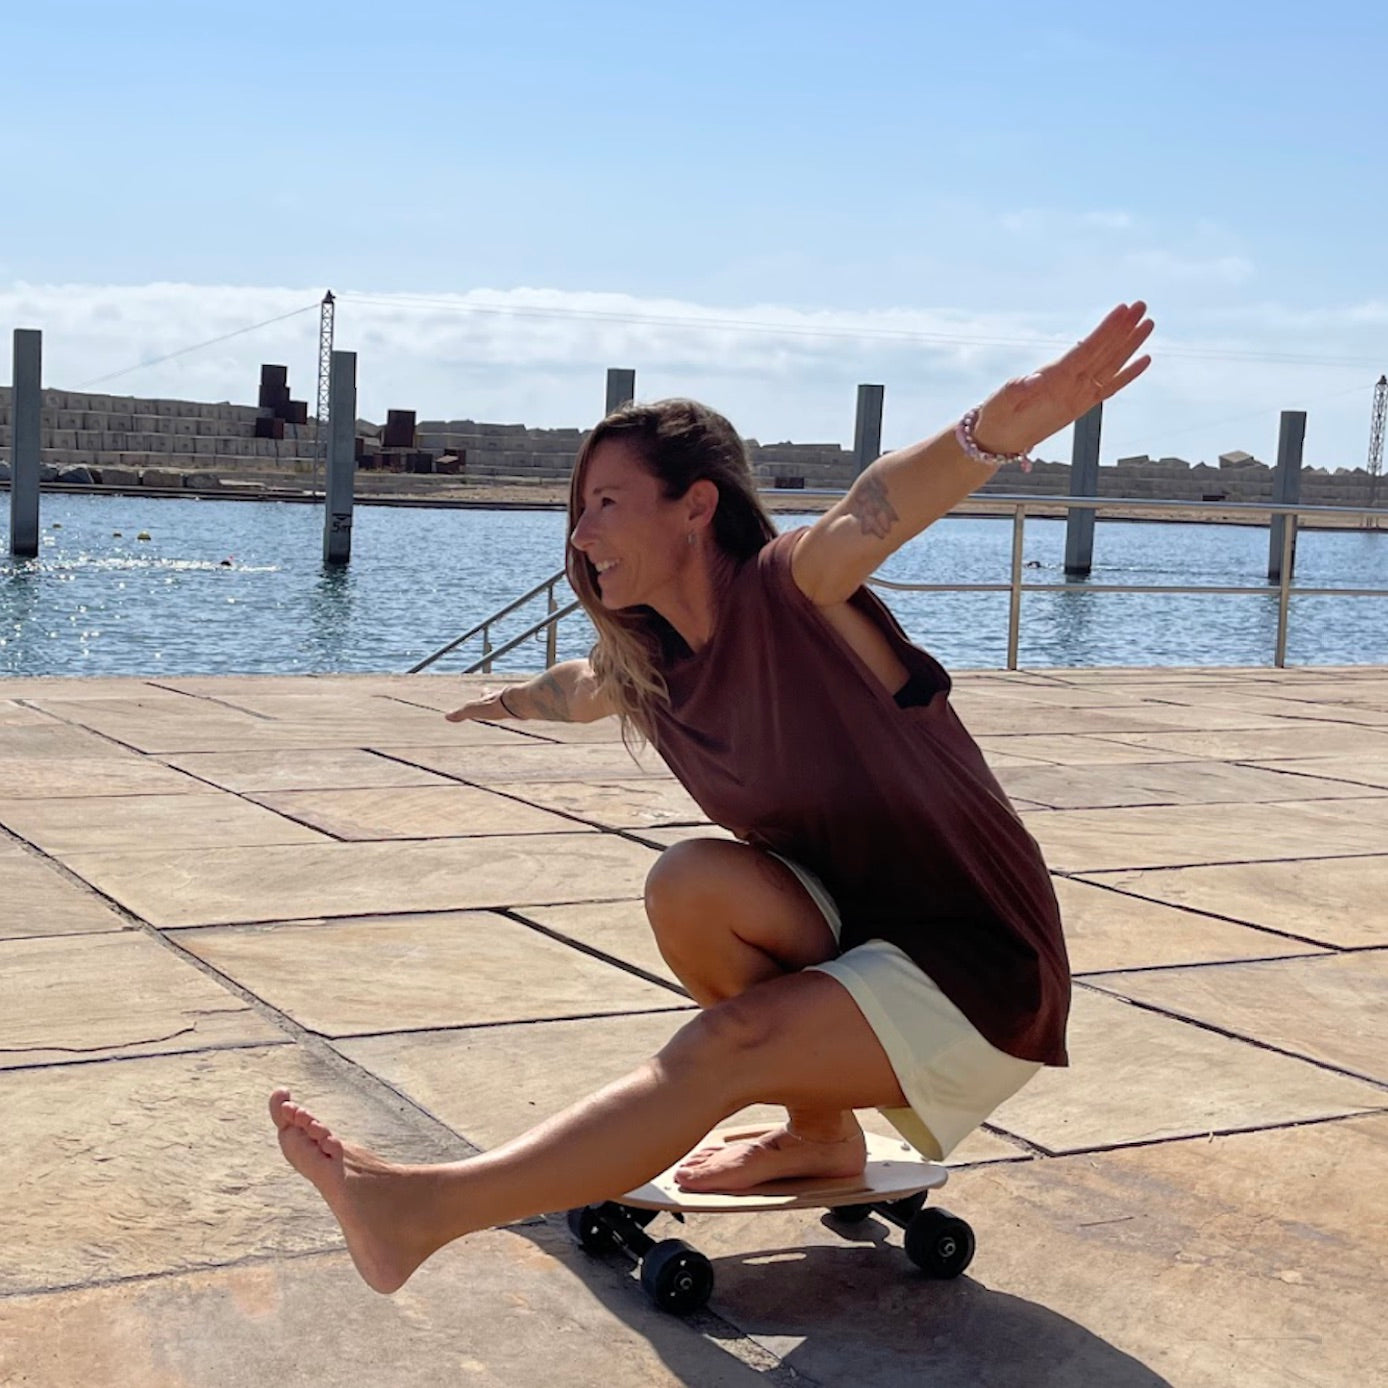 A Spanish girl gliding down Barceloneta on a weekend for a fun outdoor activity